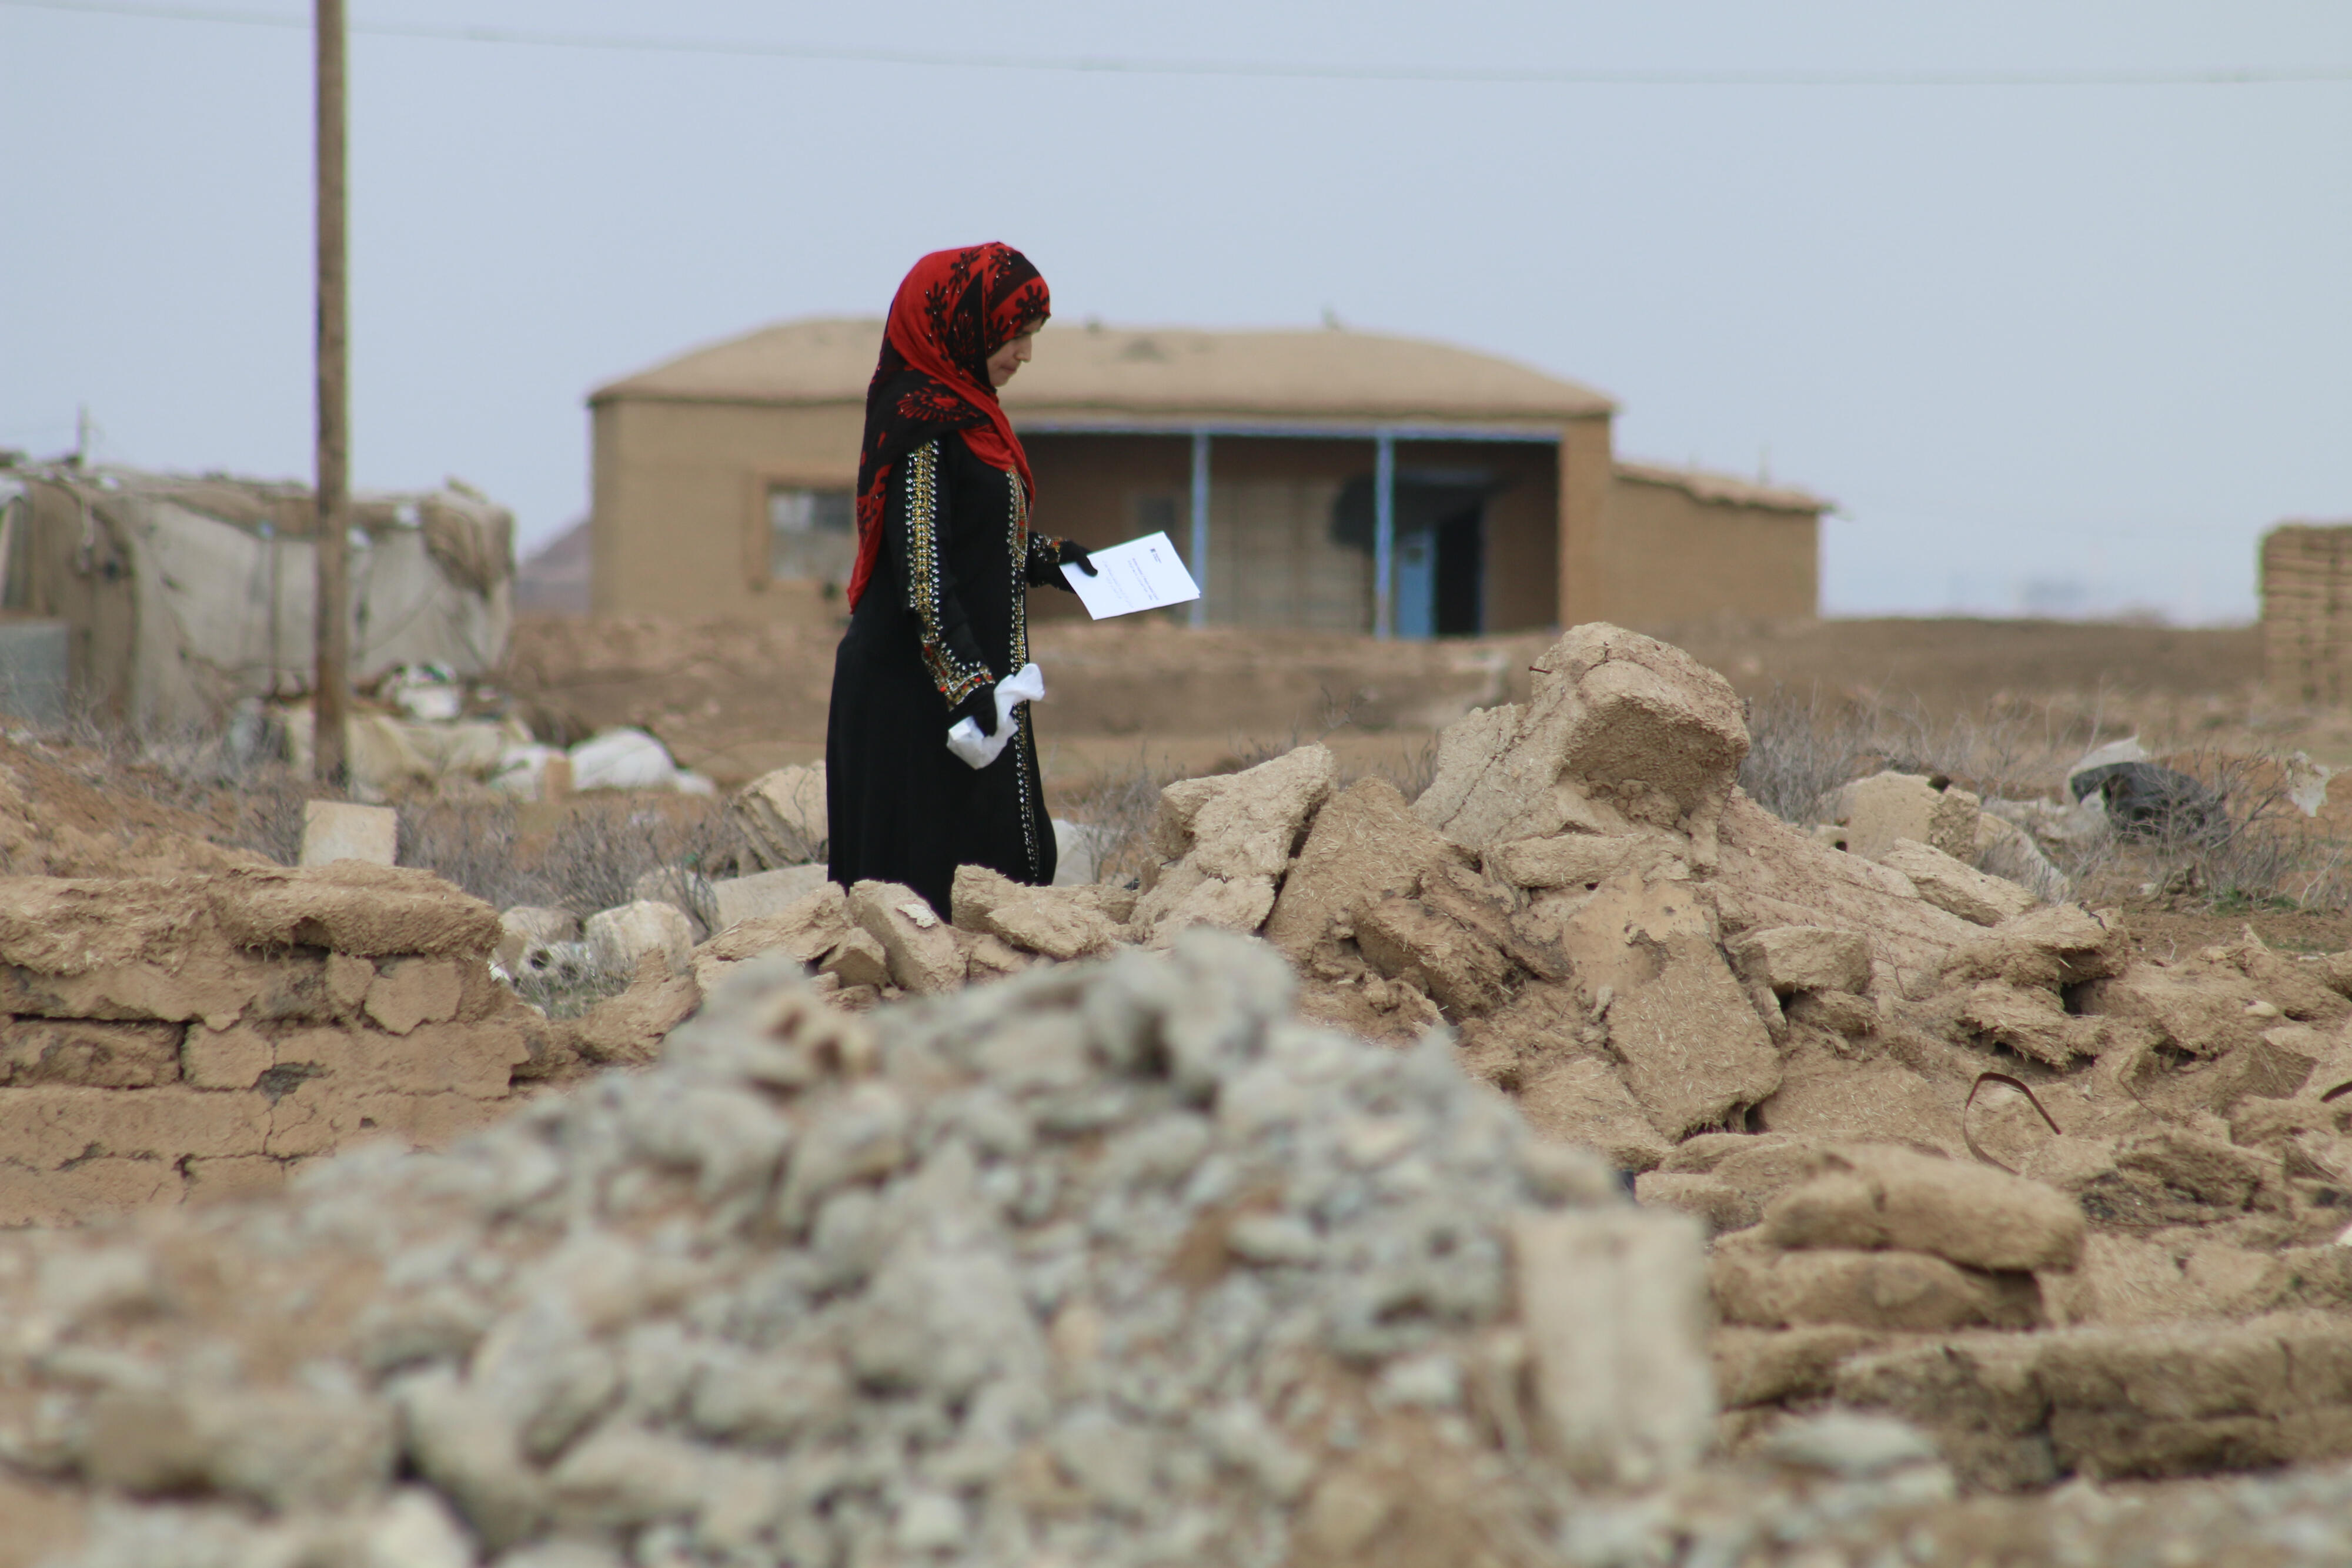 A woman picks her way through the rubble of her village in Northeast Syria, carrying a bag of prescription medicine that she received from an IRC mobile clinic.